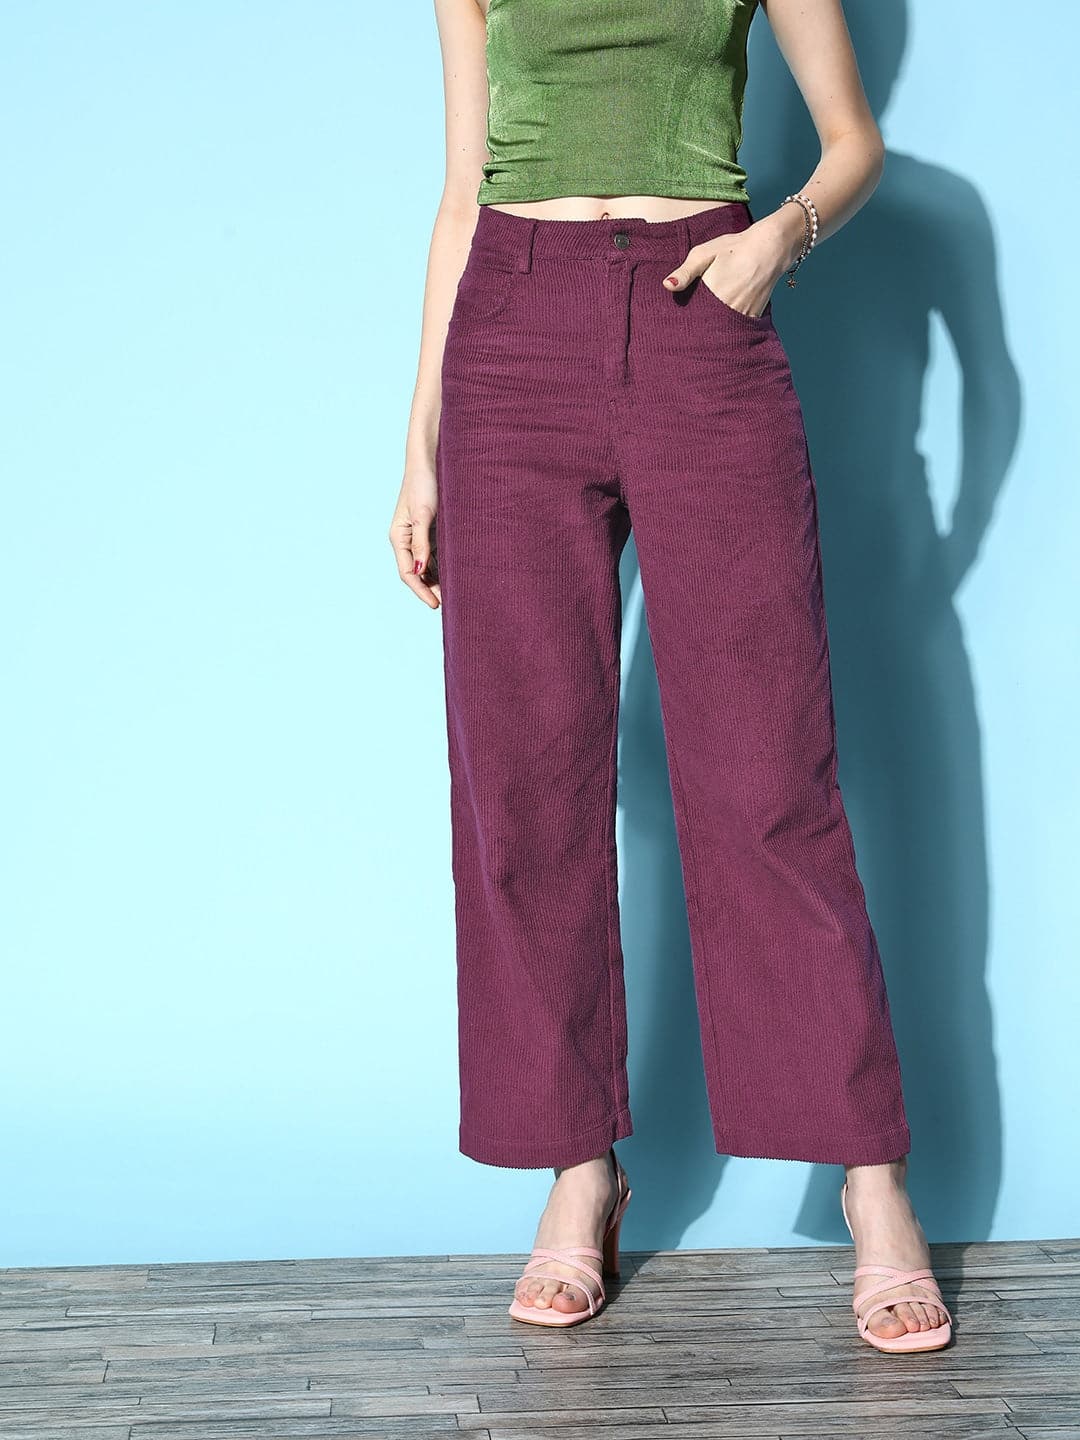 Maurices Skinny Leg Corduroy Pants Womens Size Small Maroon Low Rise | eBay